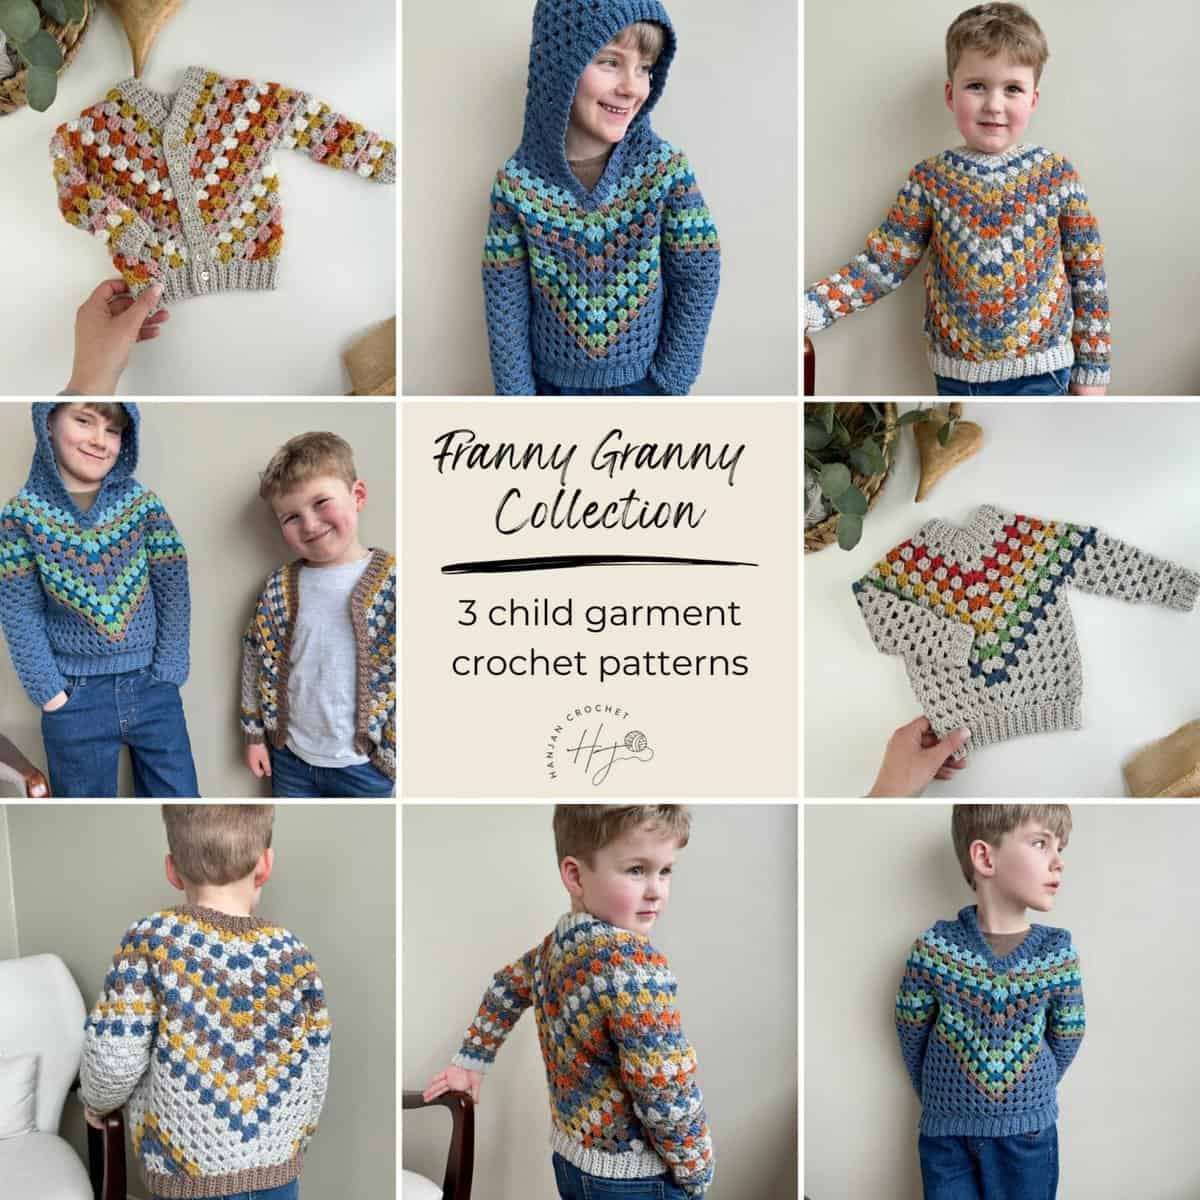 A collection of pictures of children wearing a chevron sweater.